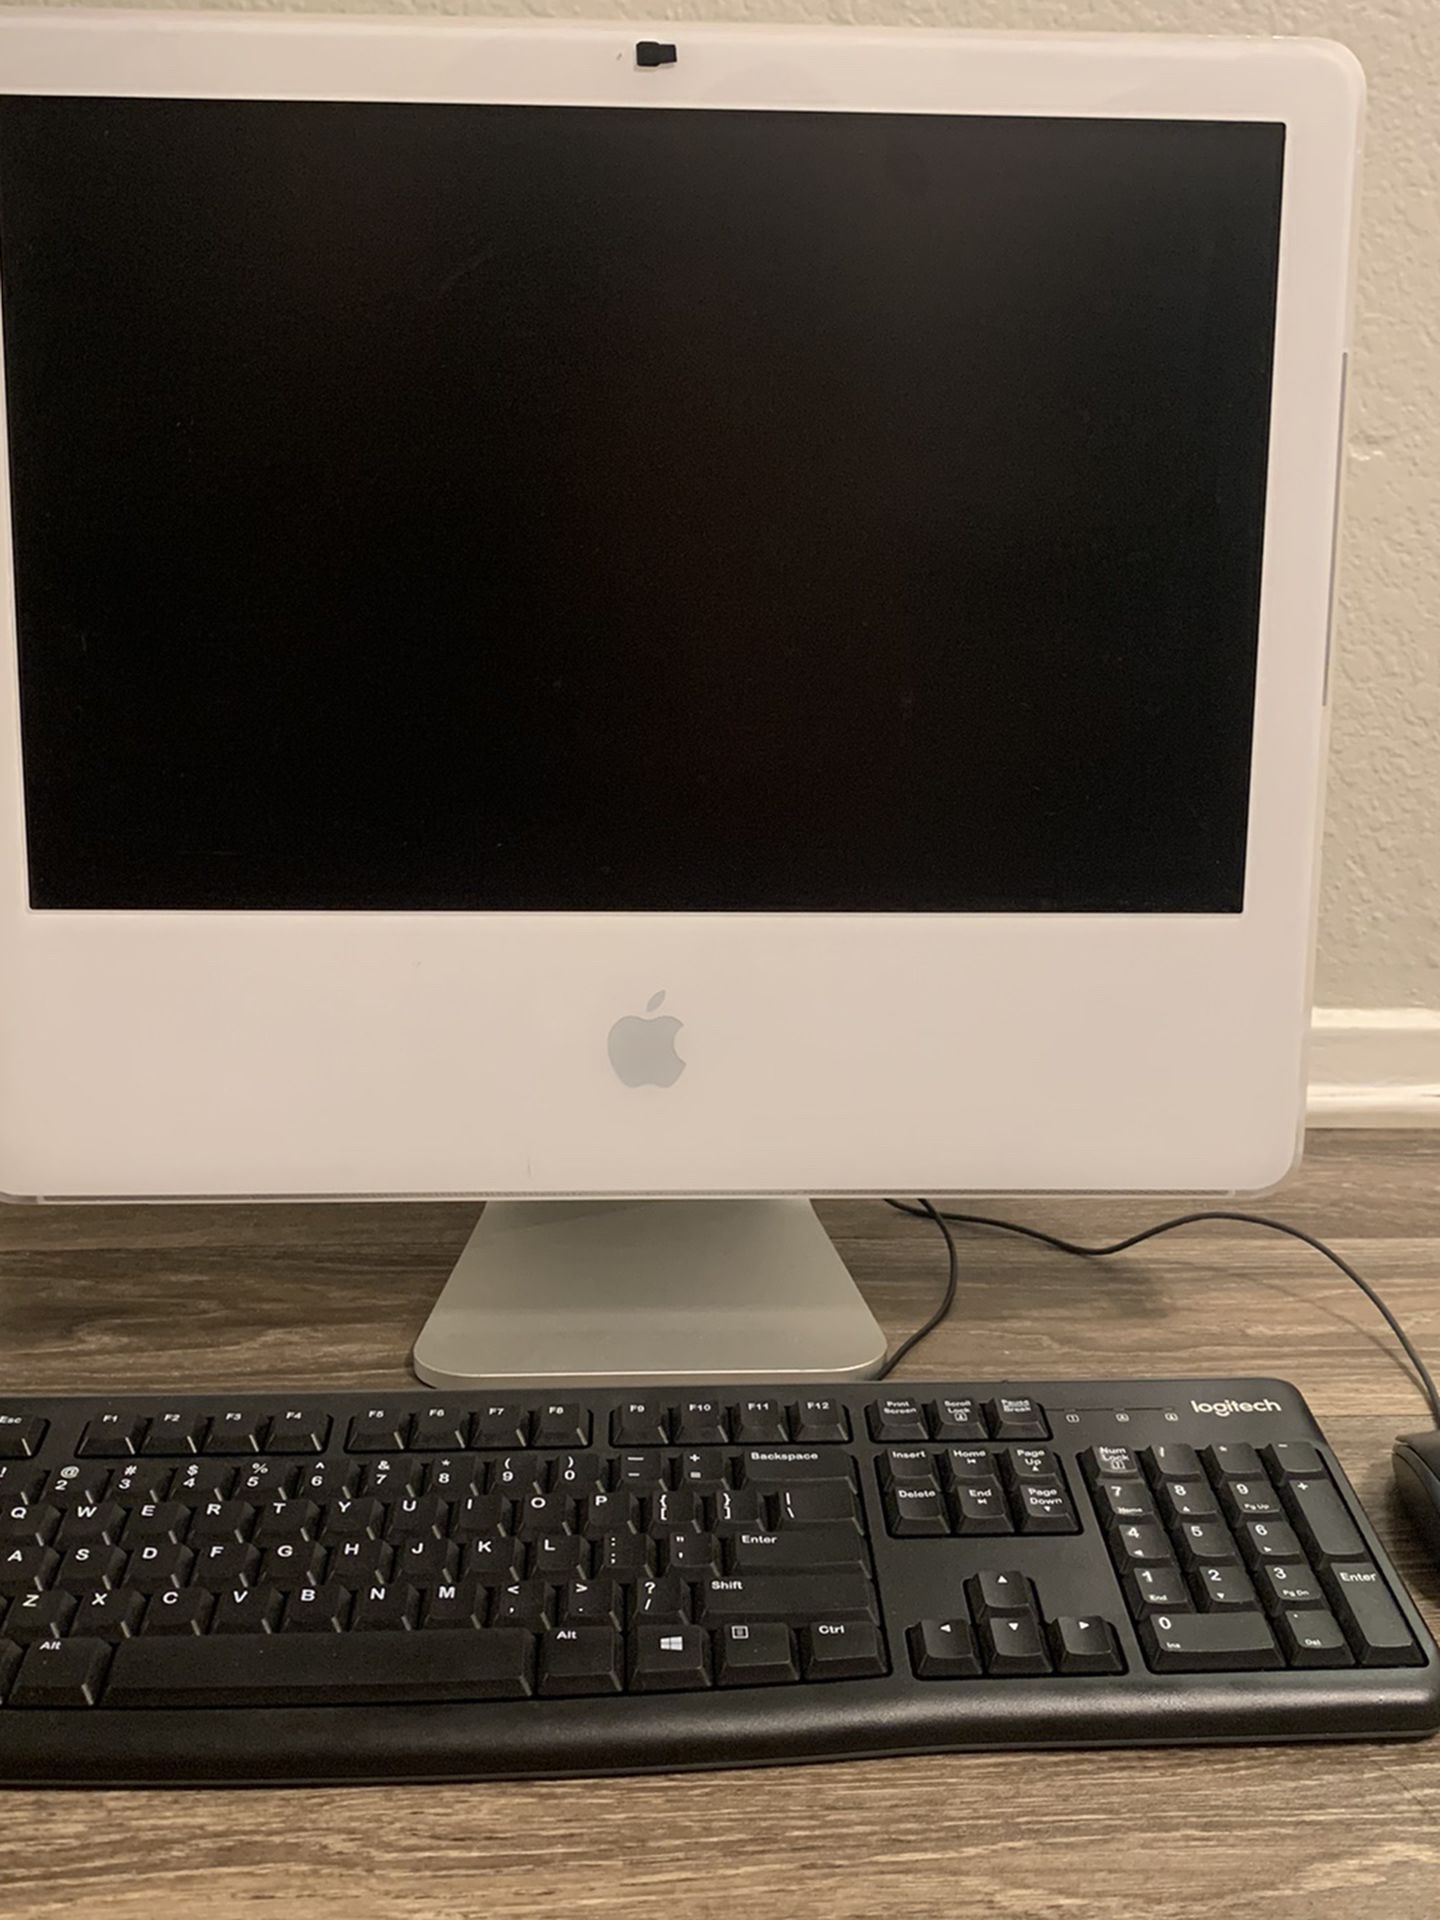 2006 iMac in Great Condition Works Perfectly